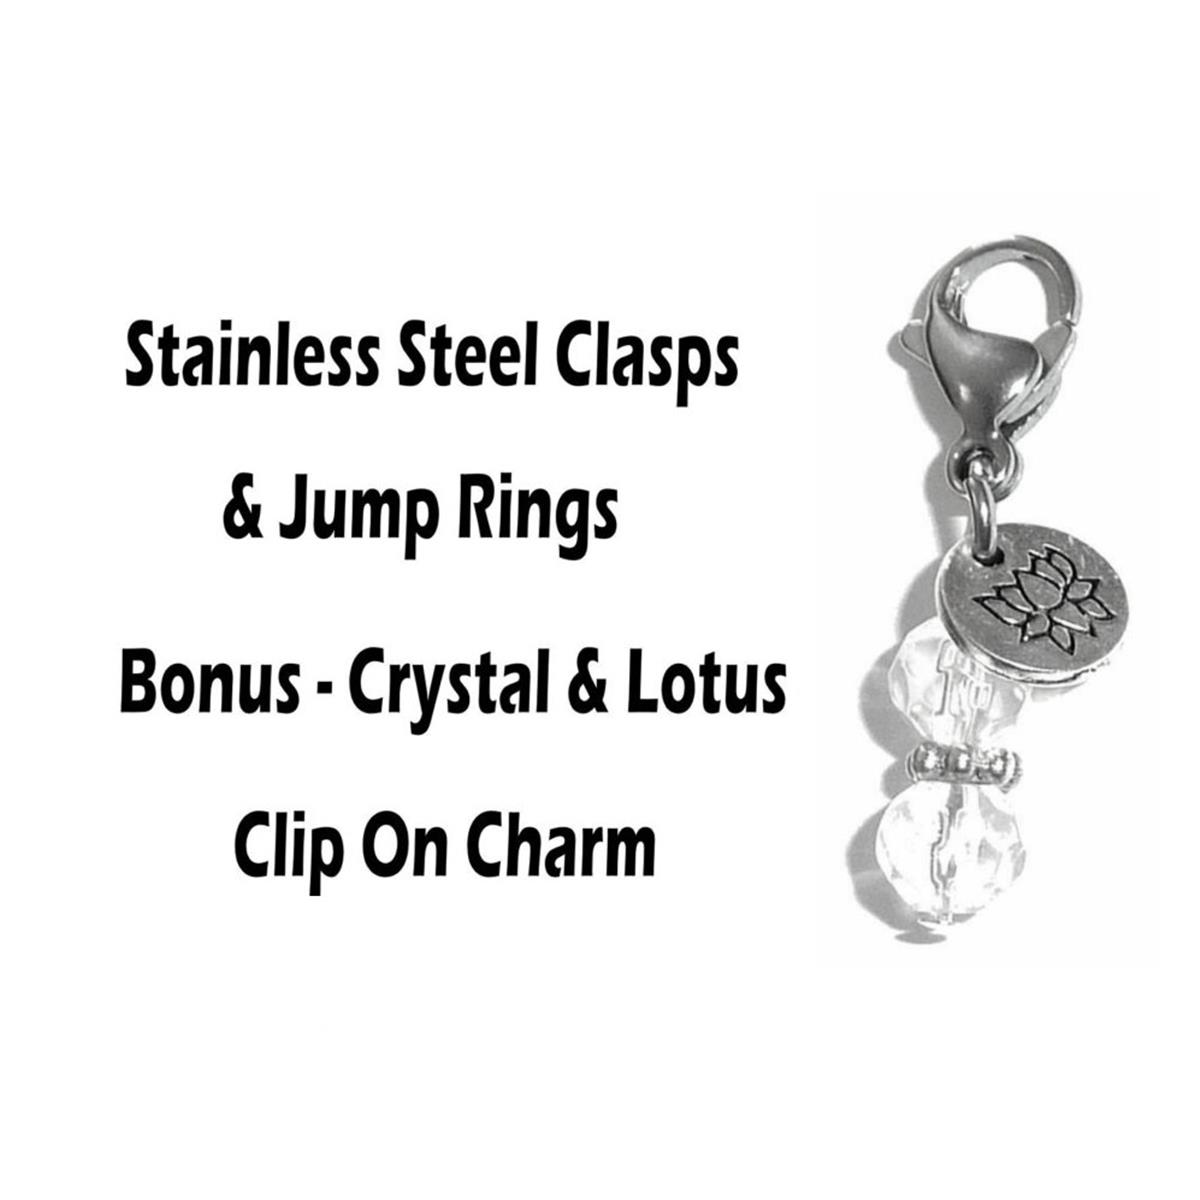 Cancer Awareness Clip On Charms - Whimsical Charms Clip On Anywhere